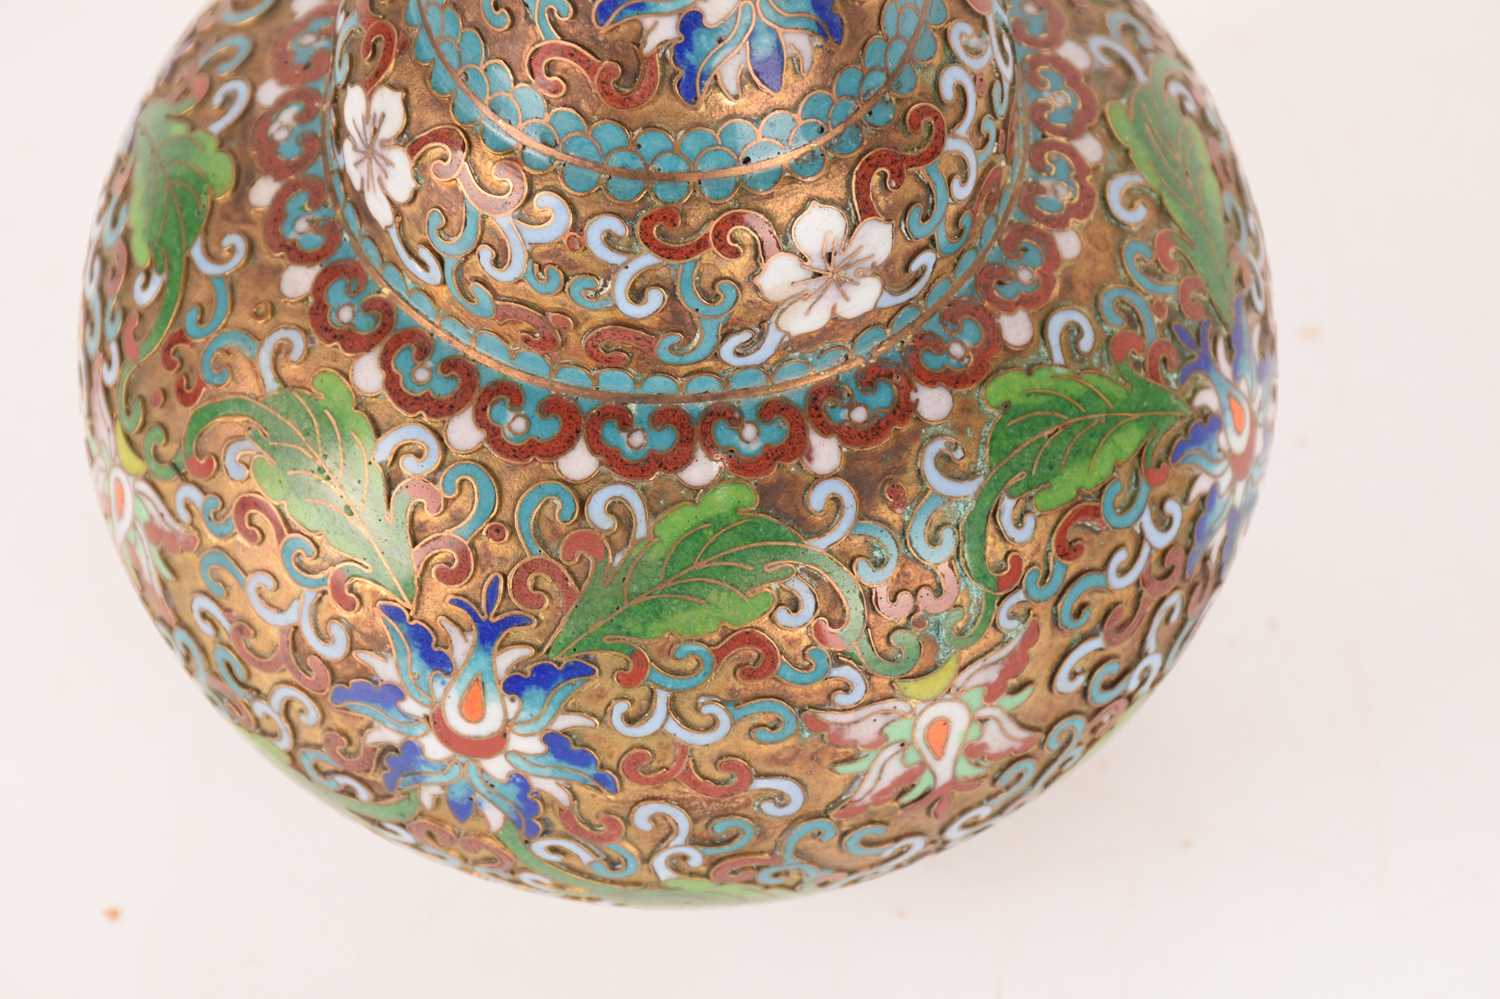 A 20th-century Chinese cloisonne and champleve enamel vase with polychrome enamel scrolls and foliag - Image 6 of 7